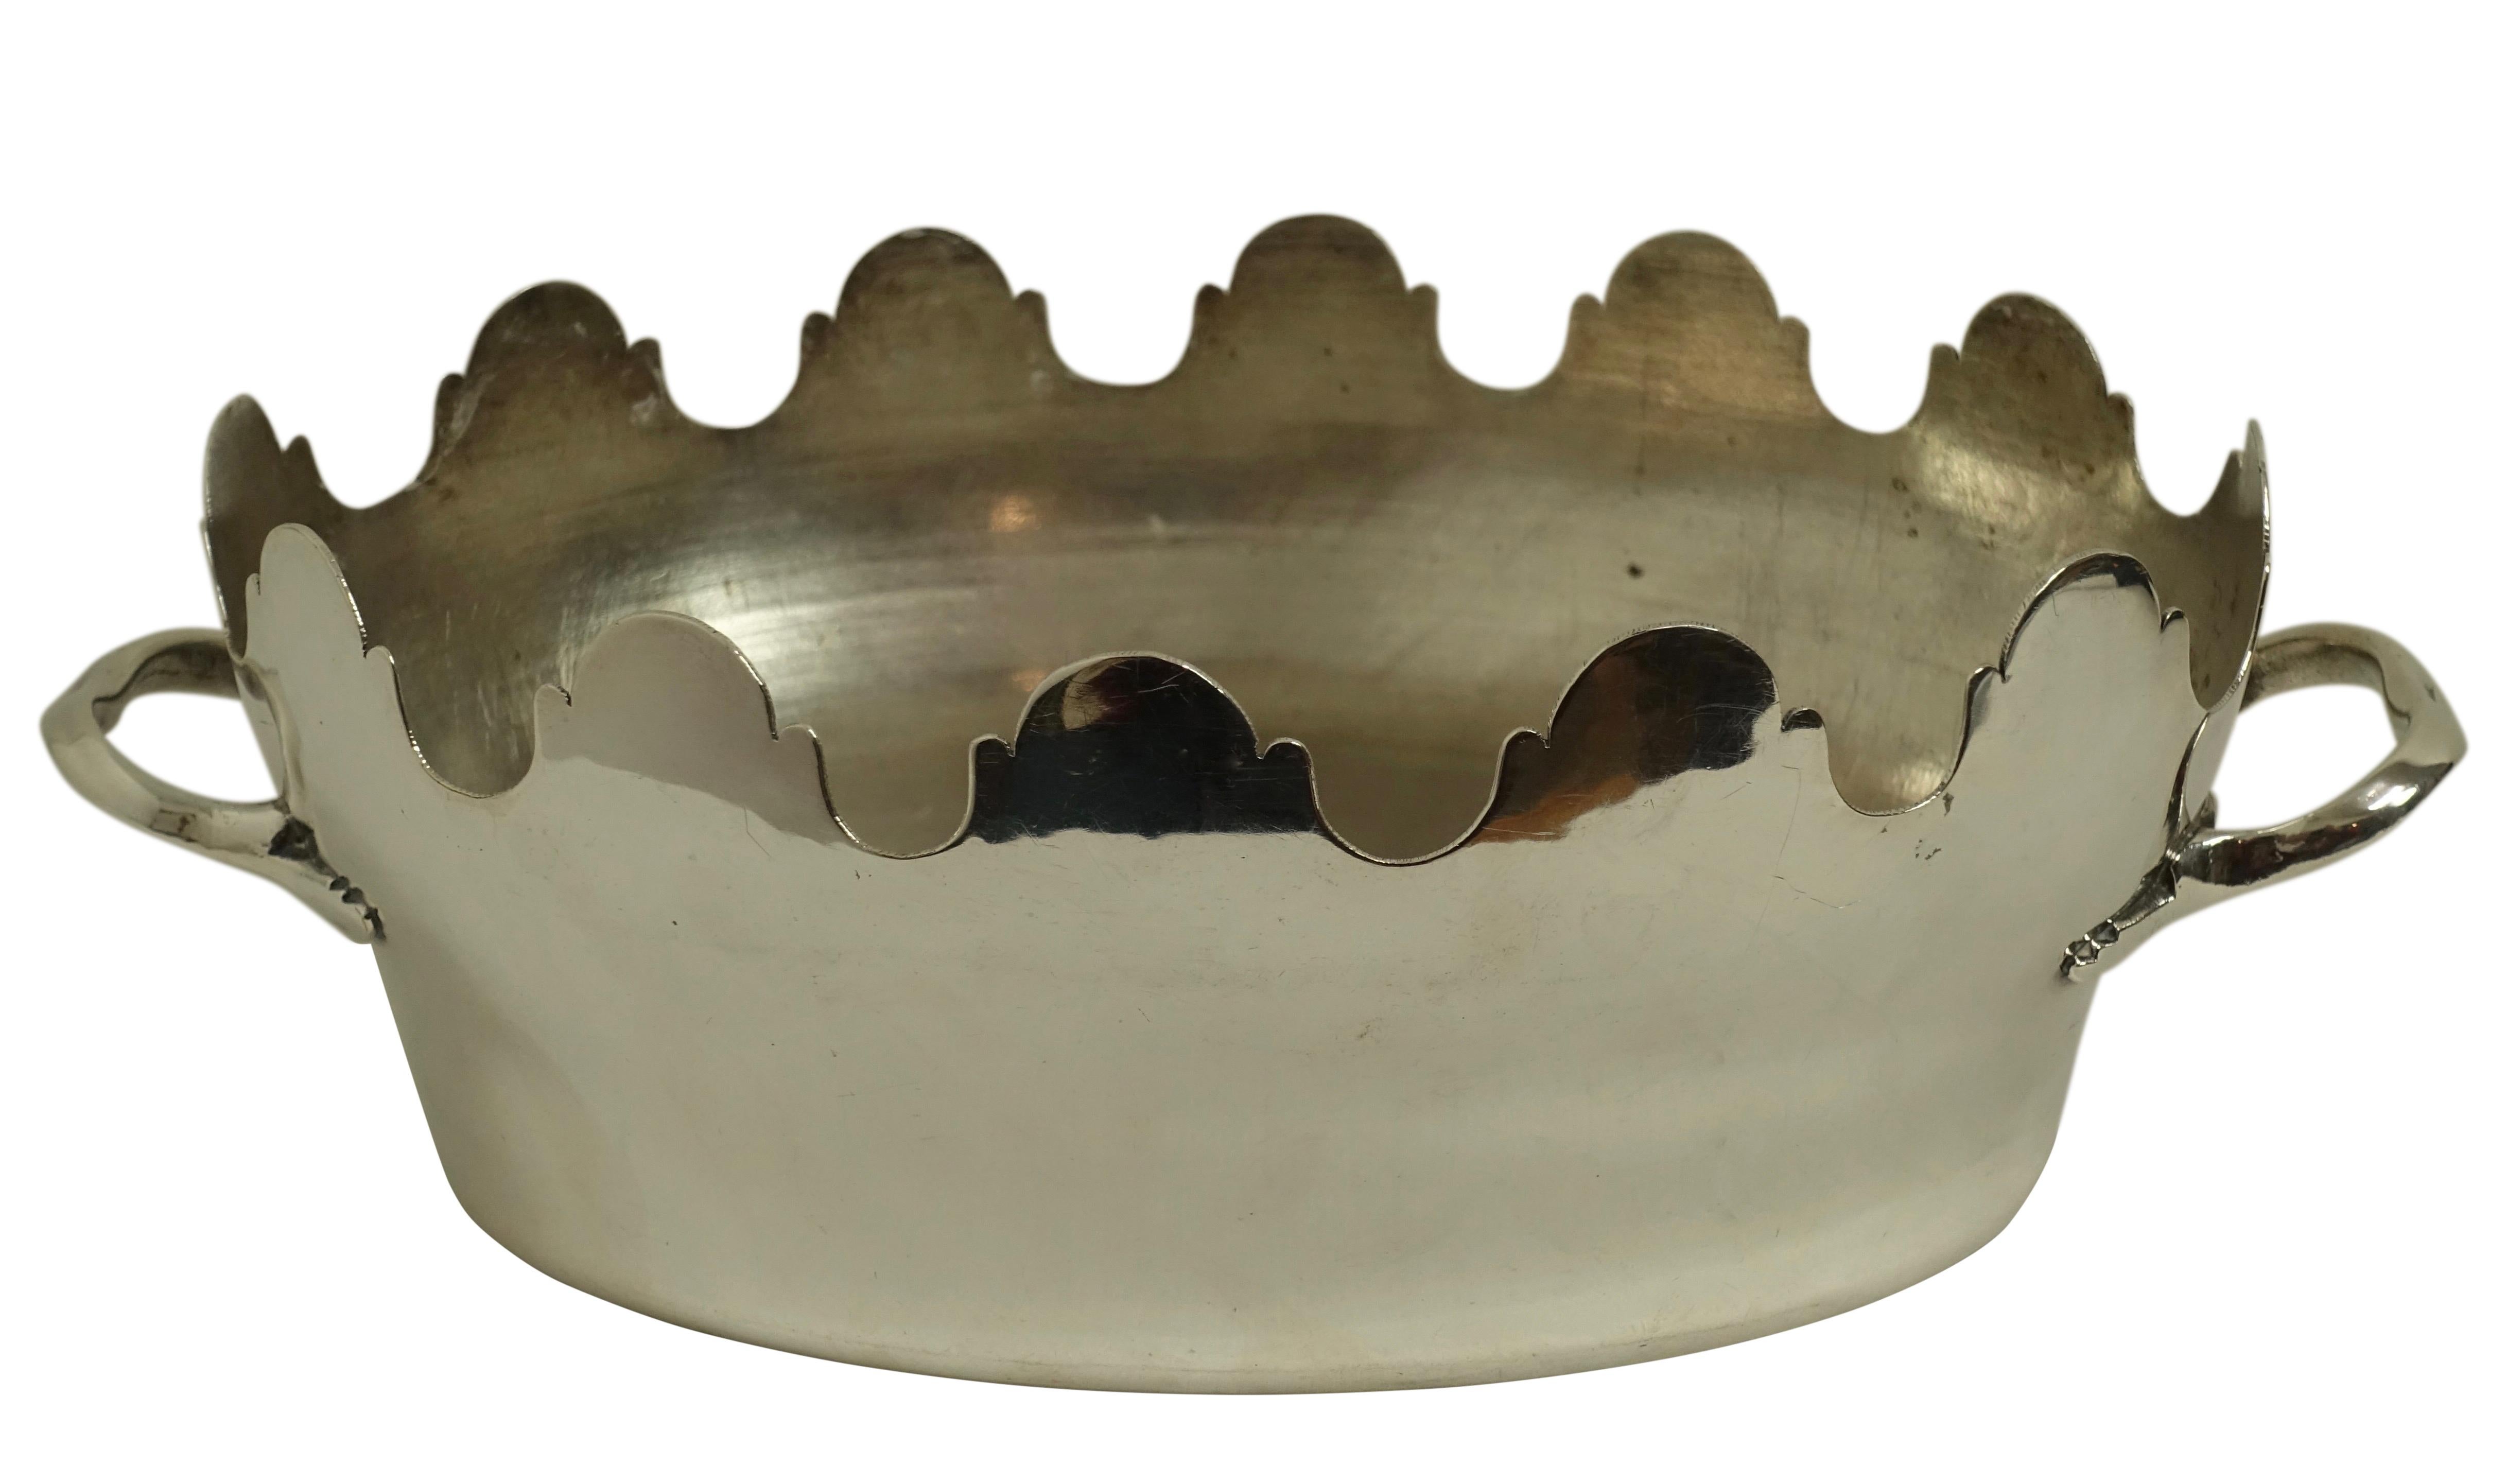 Oval silver plated Monteith bowl with loop leaf handles. Great as a jardinière or cachepot. Impressed mark on the underside, French, 19th century.